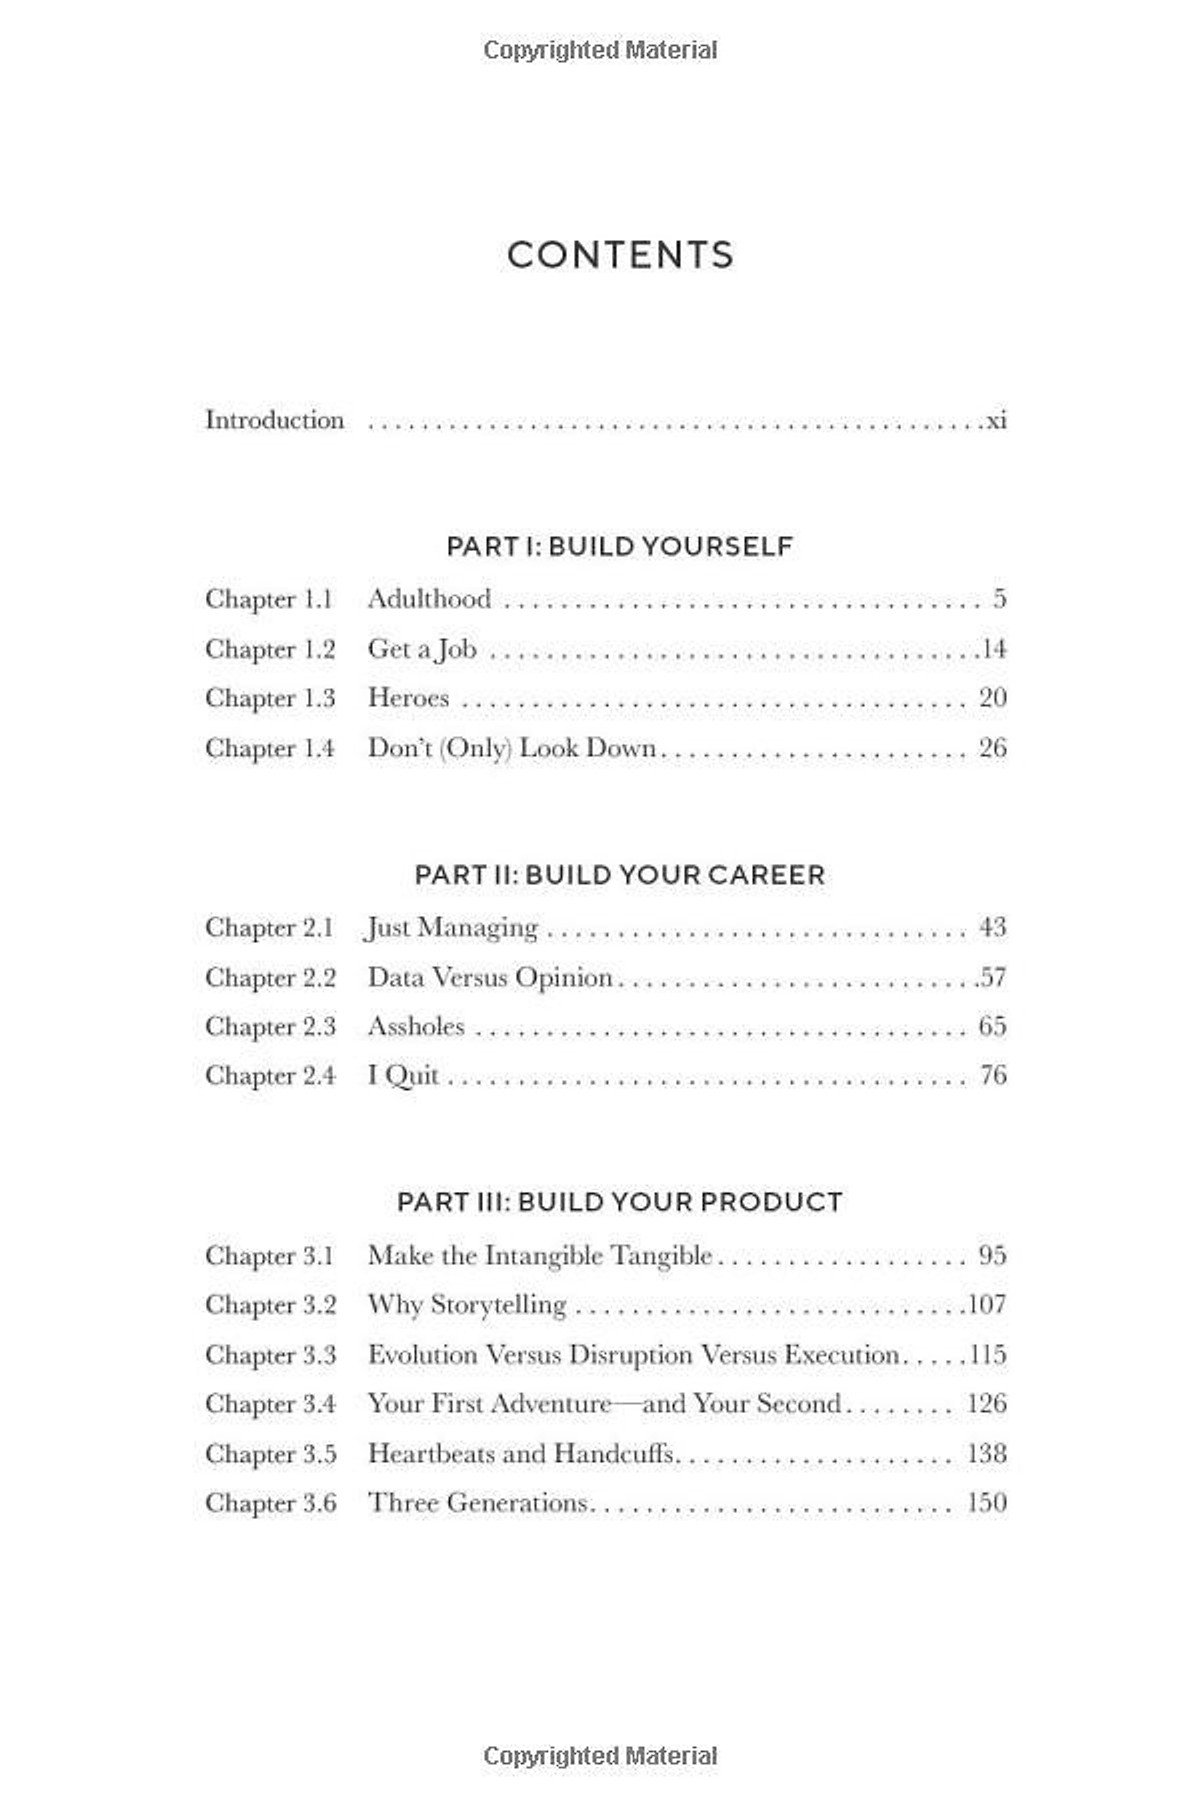 Build: An Unorthodox Guide To Making Things Worth Making